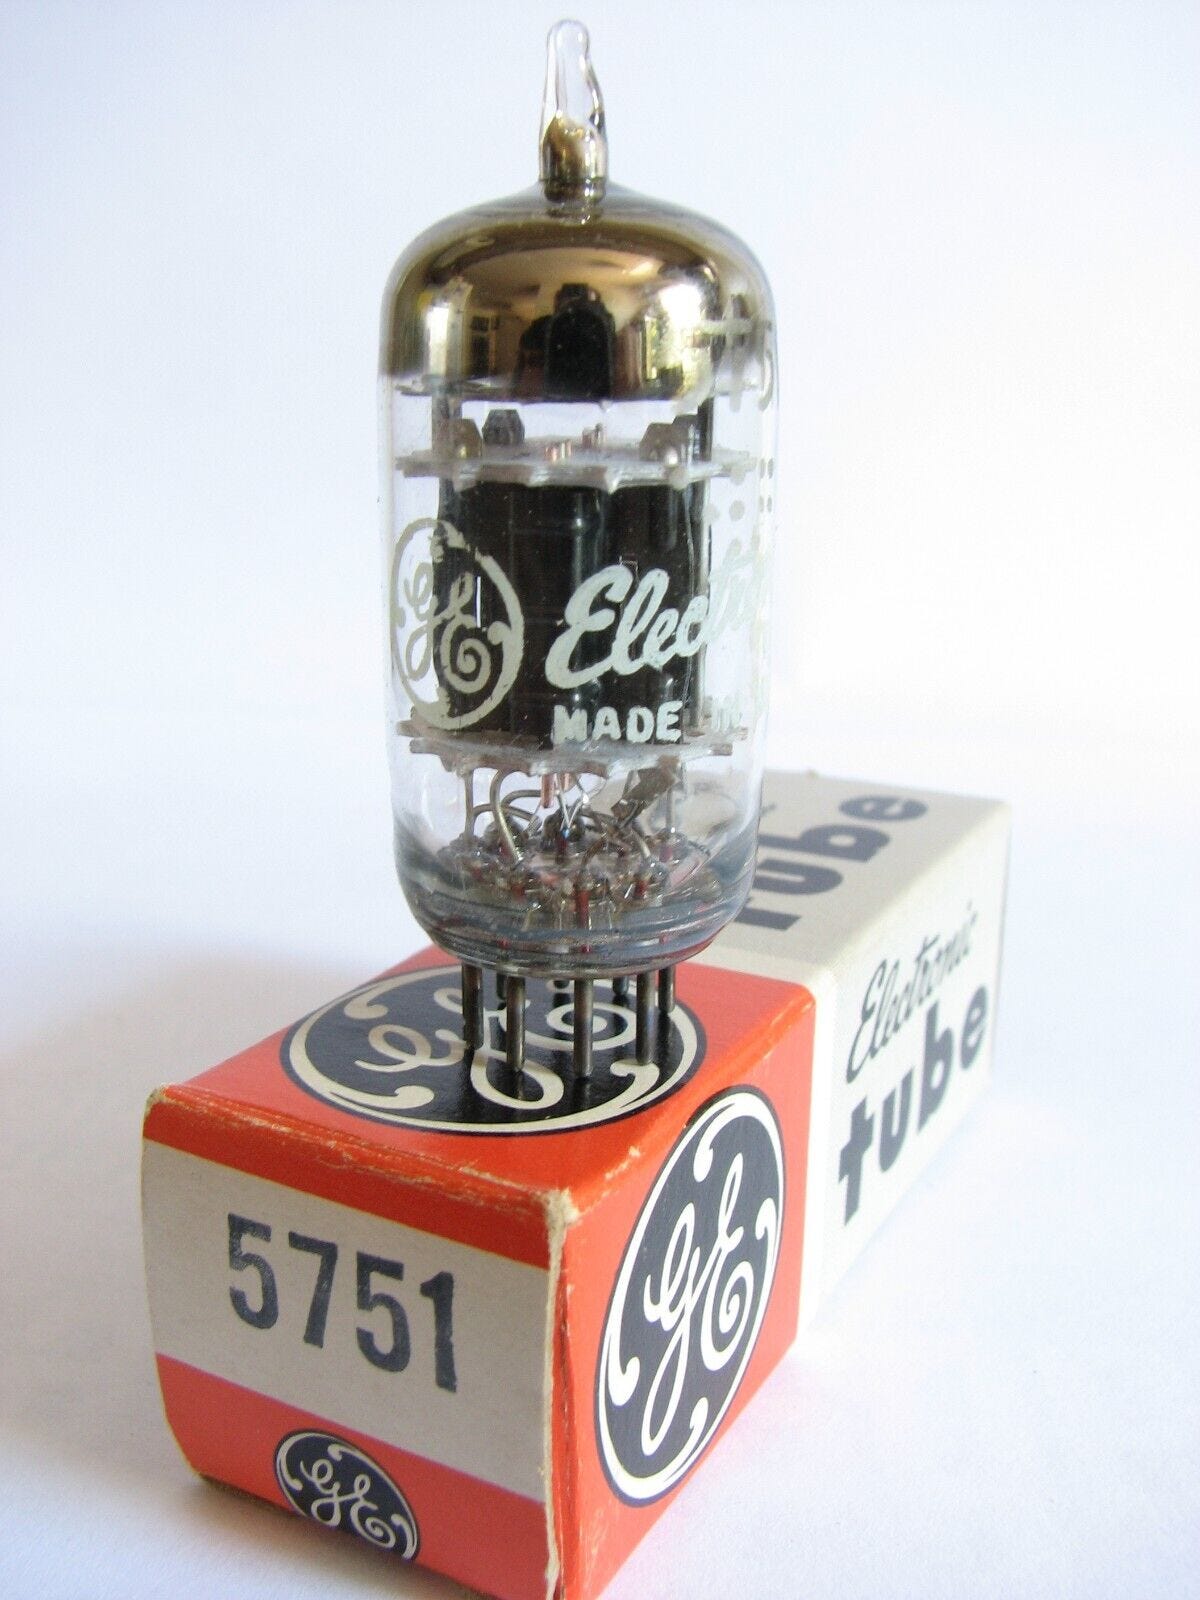 1950s GE 5751 Black Plates, 3-Mica Tube - Hickok TV7B tests @ 46/47, min: 32/32 - Picture 1 of 4